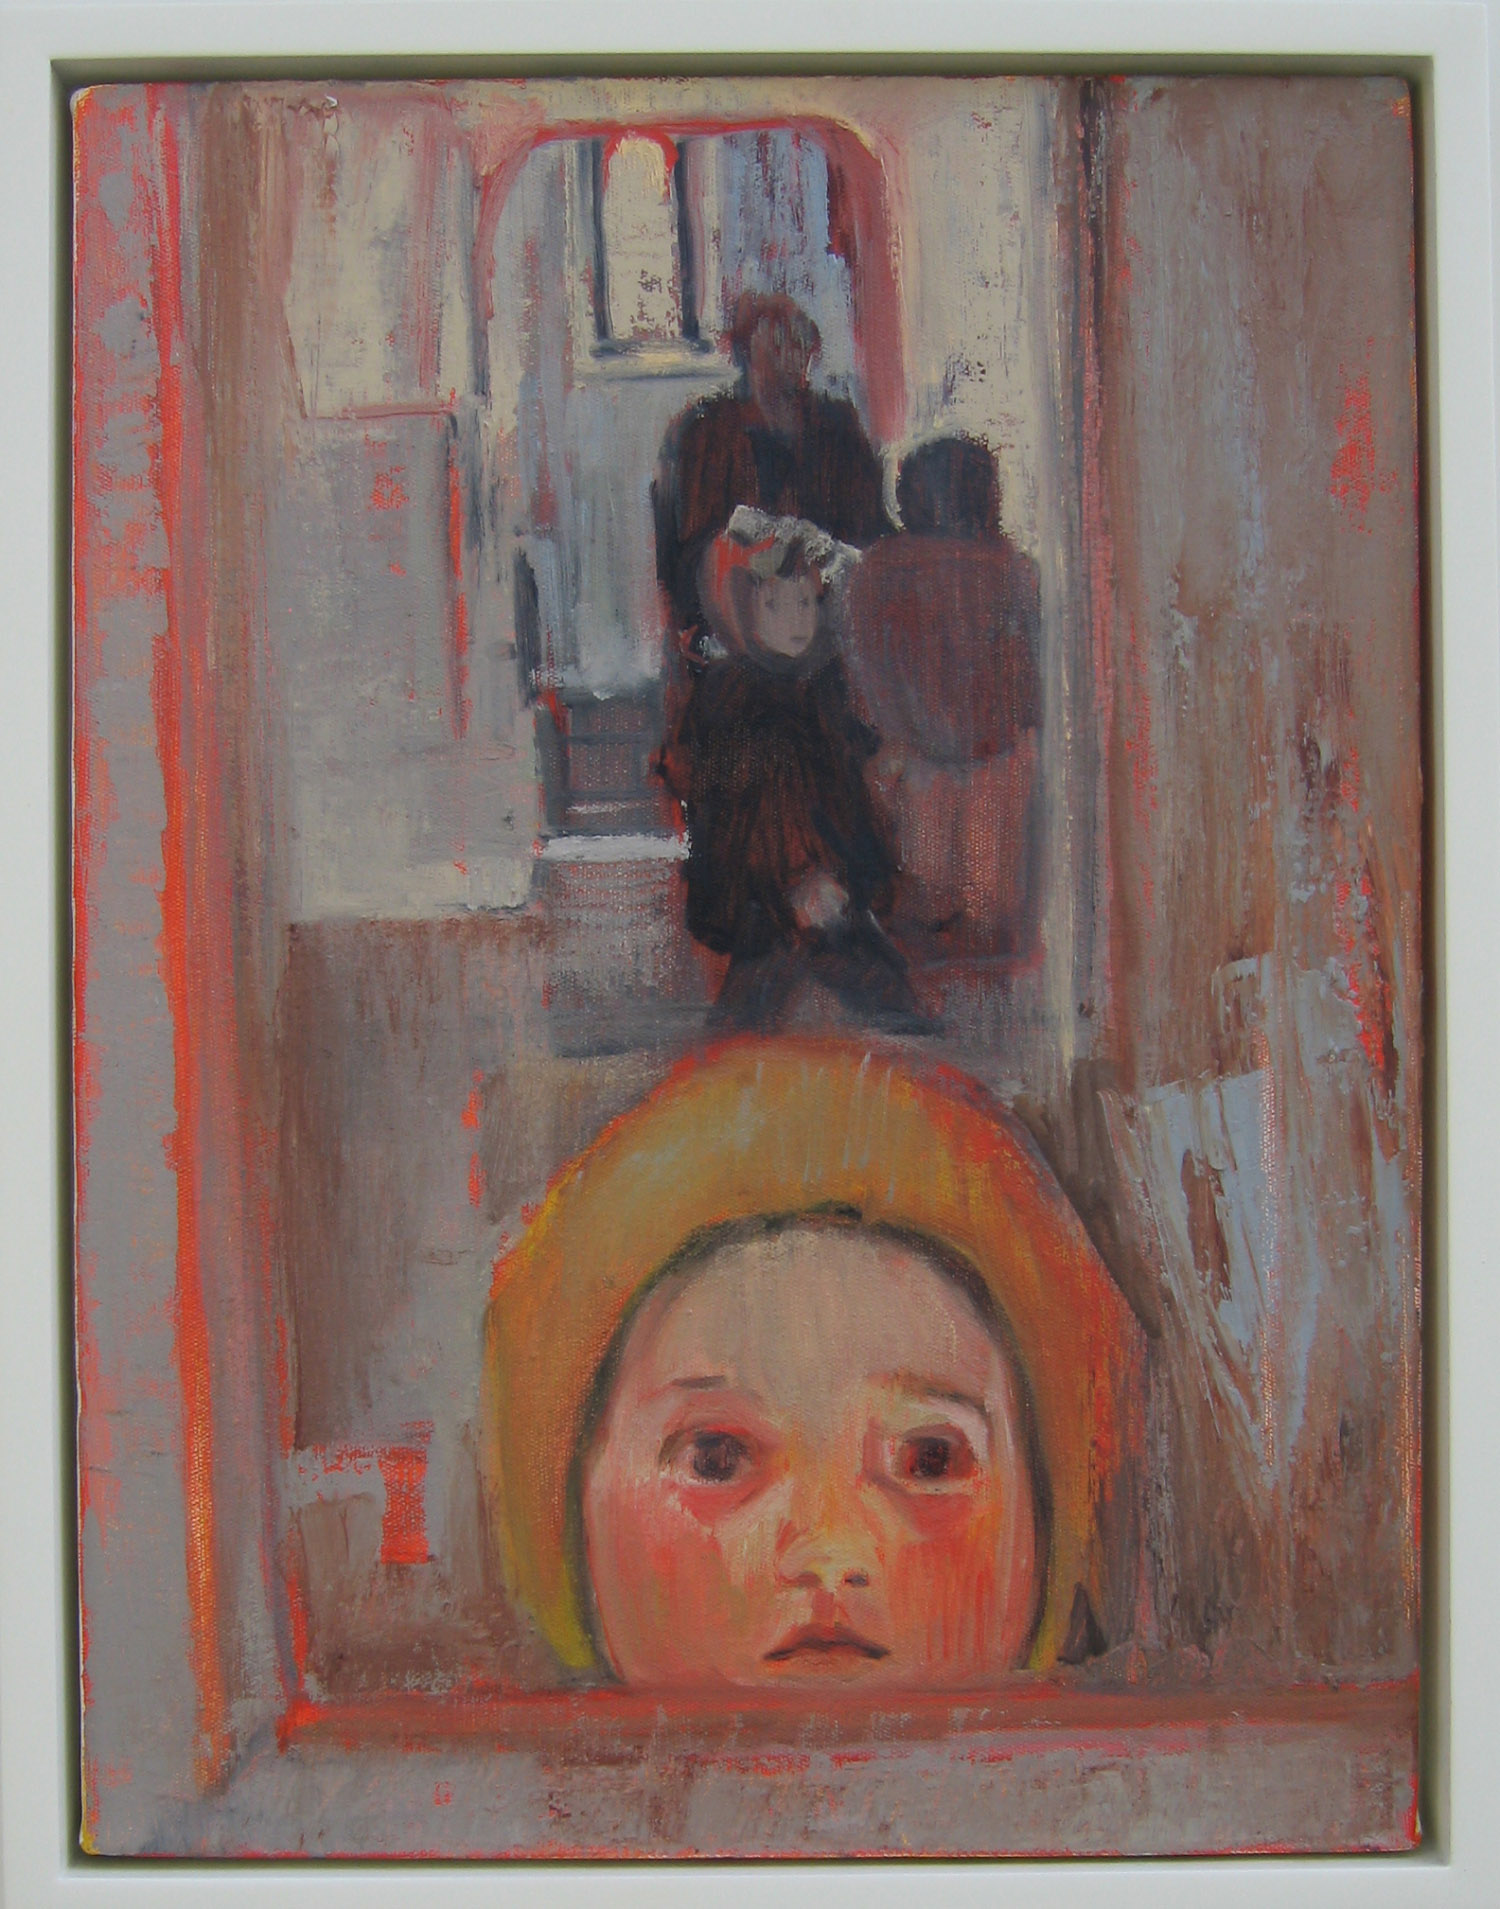 5bg(0) - The Visit, oil,wax on canvas,wood, 23x19 in. 2004.jpg